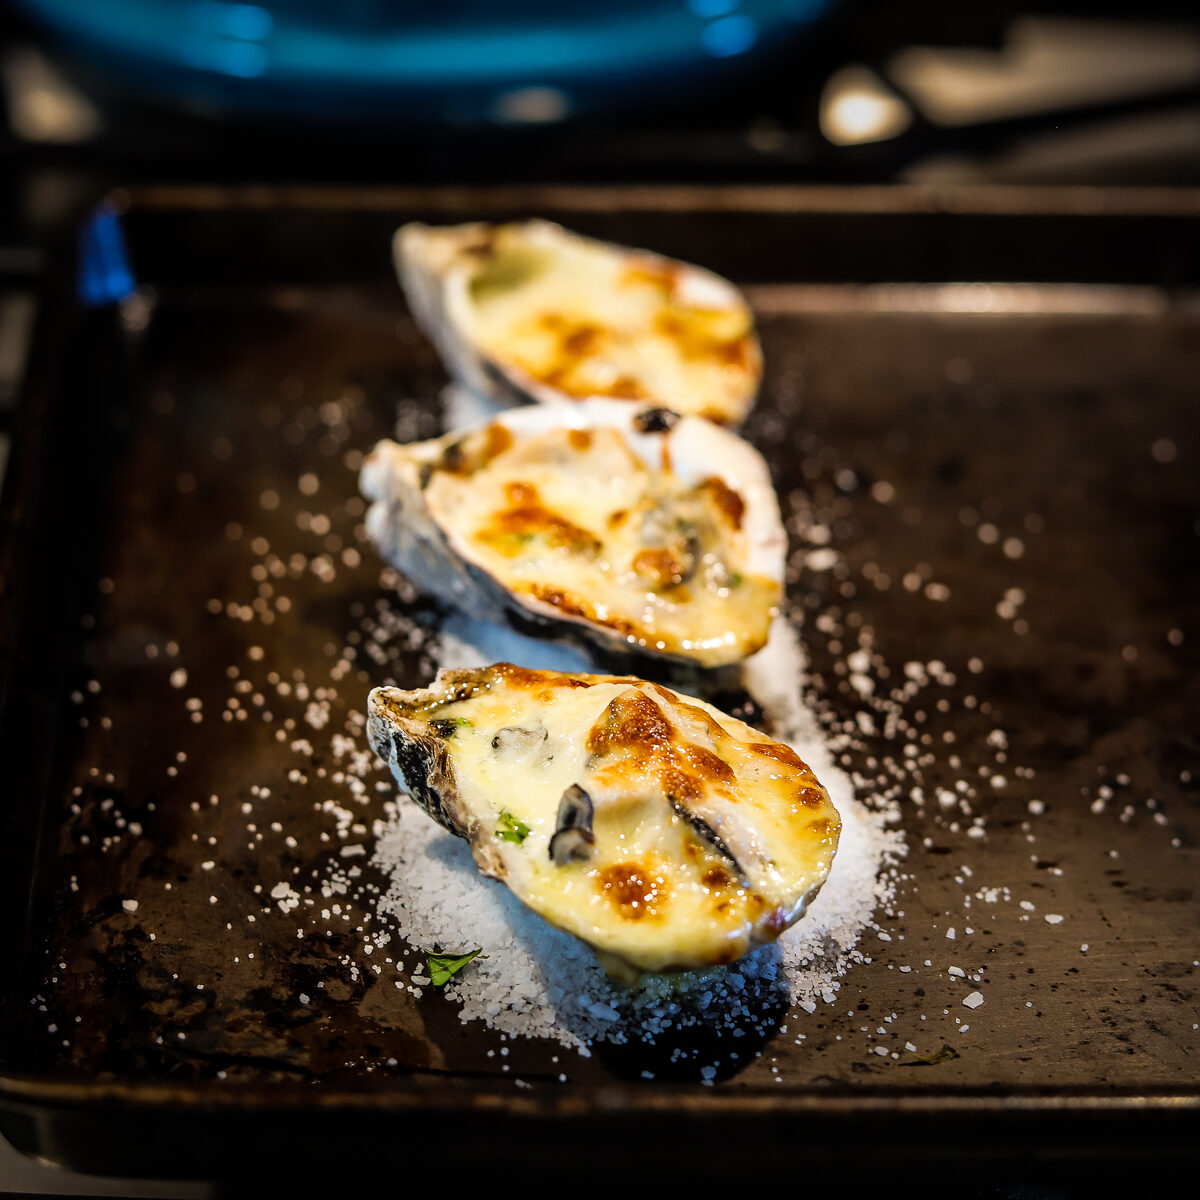 3 oyster shells on salt on a black baking sheet with a bubbly yellow and browned sauce and oysters inside.